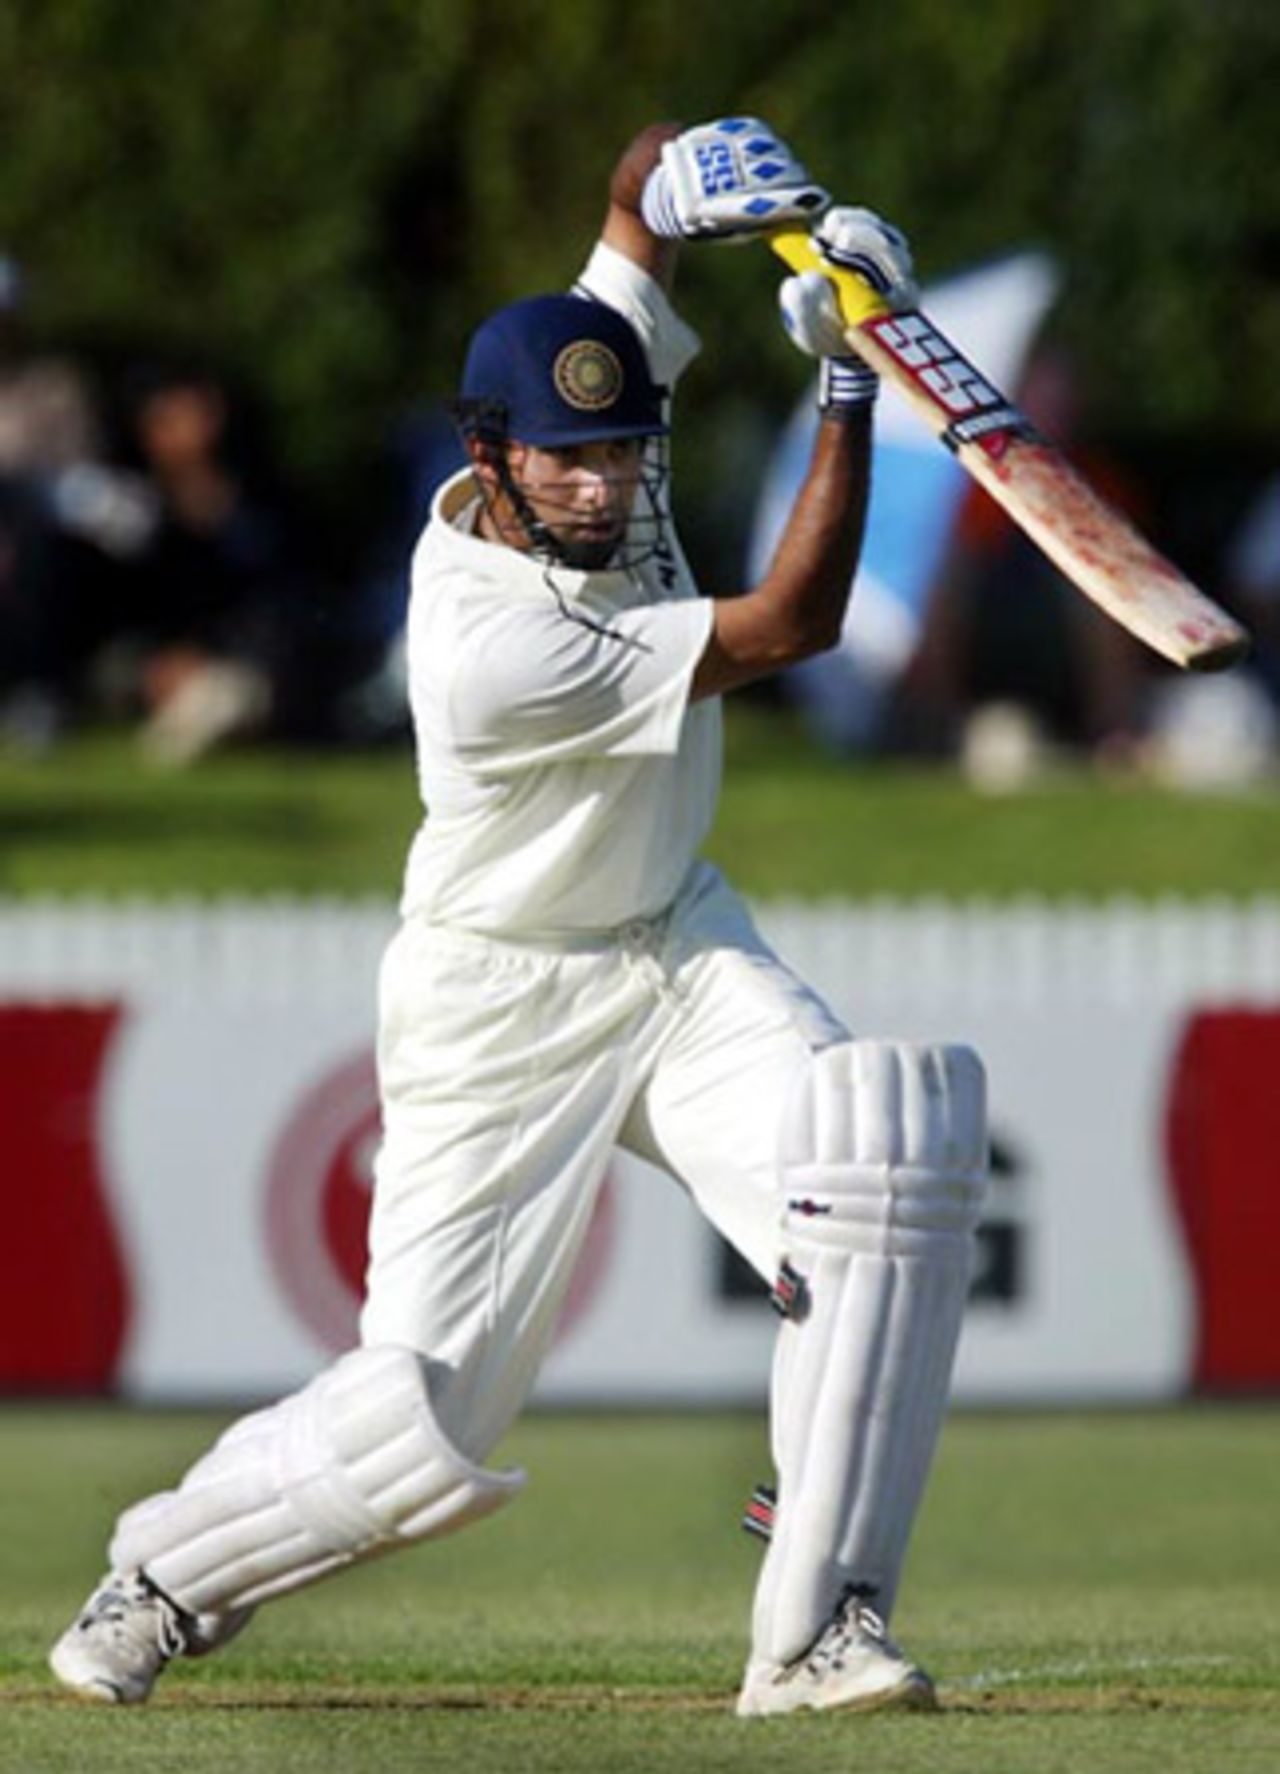 Indian batsman VVS Laxman drives a delivery through the covers during his first innings of 23. 2nd Test: New Zealand v India at Westpac Park, Hamilton, 19-23 December 2002 (20 December 2002).